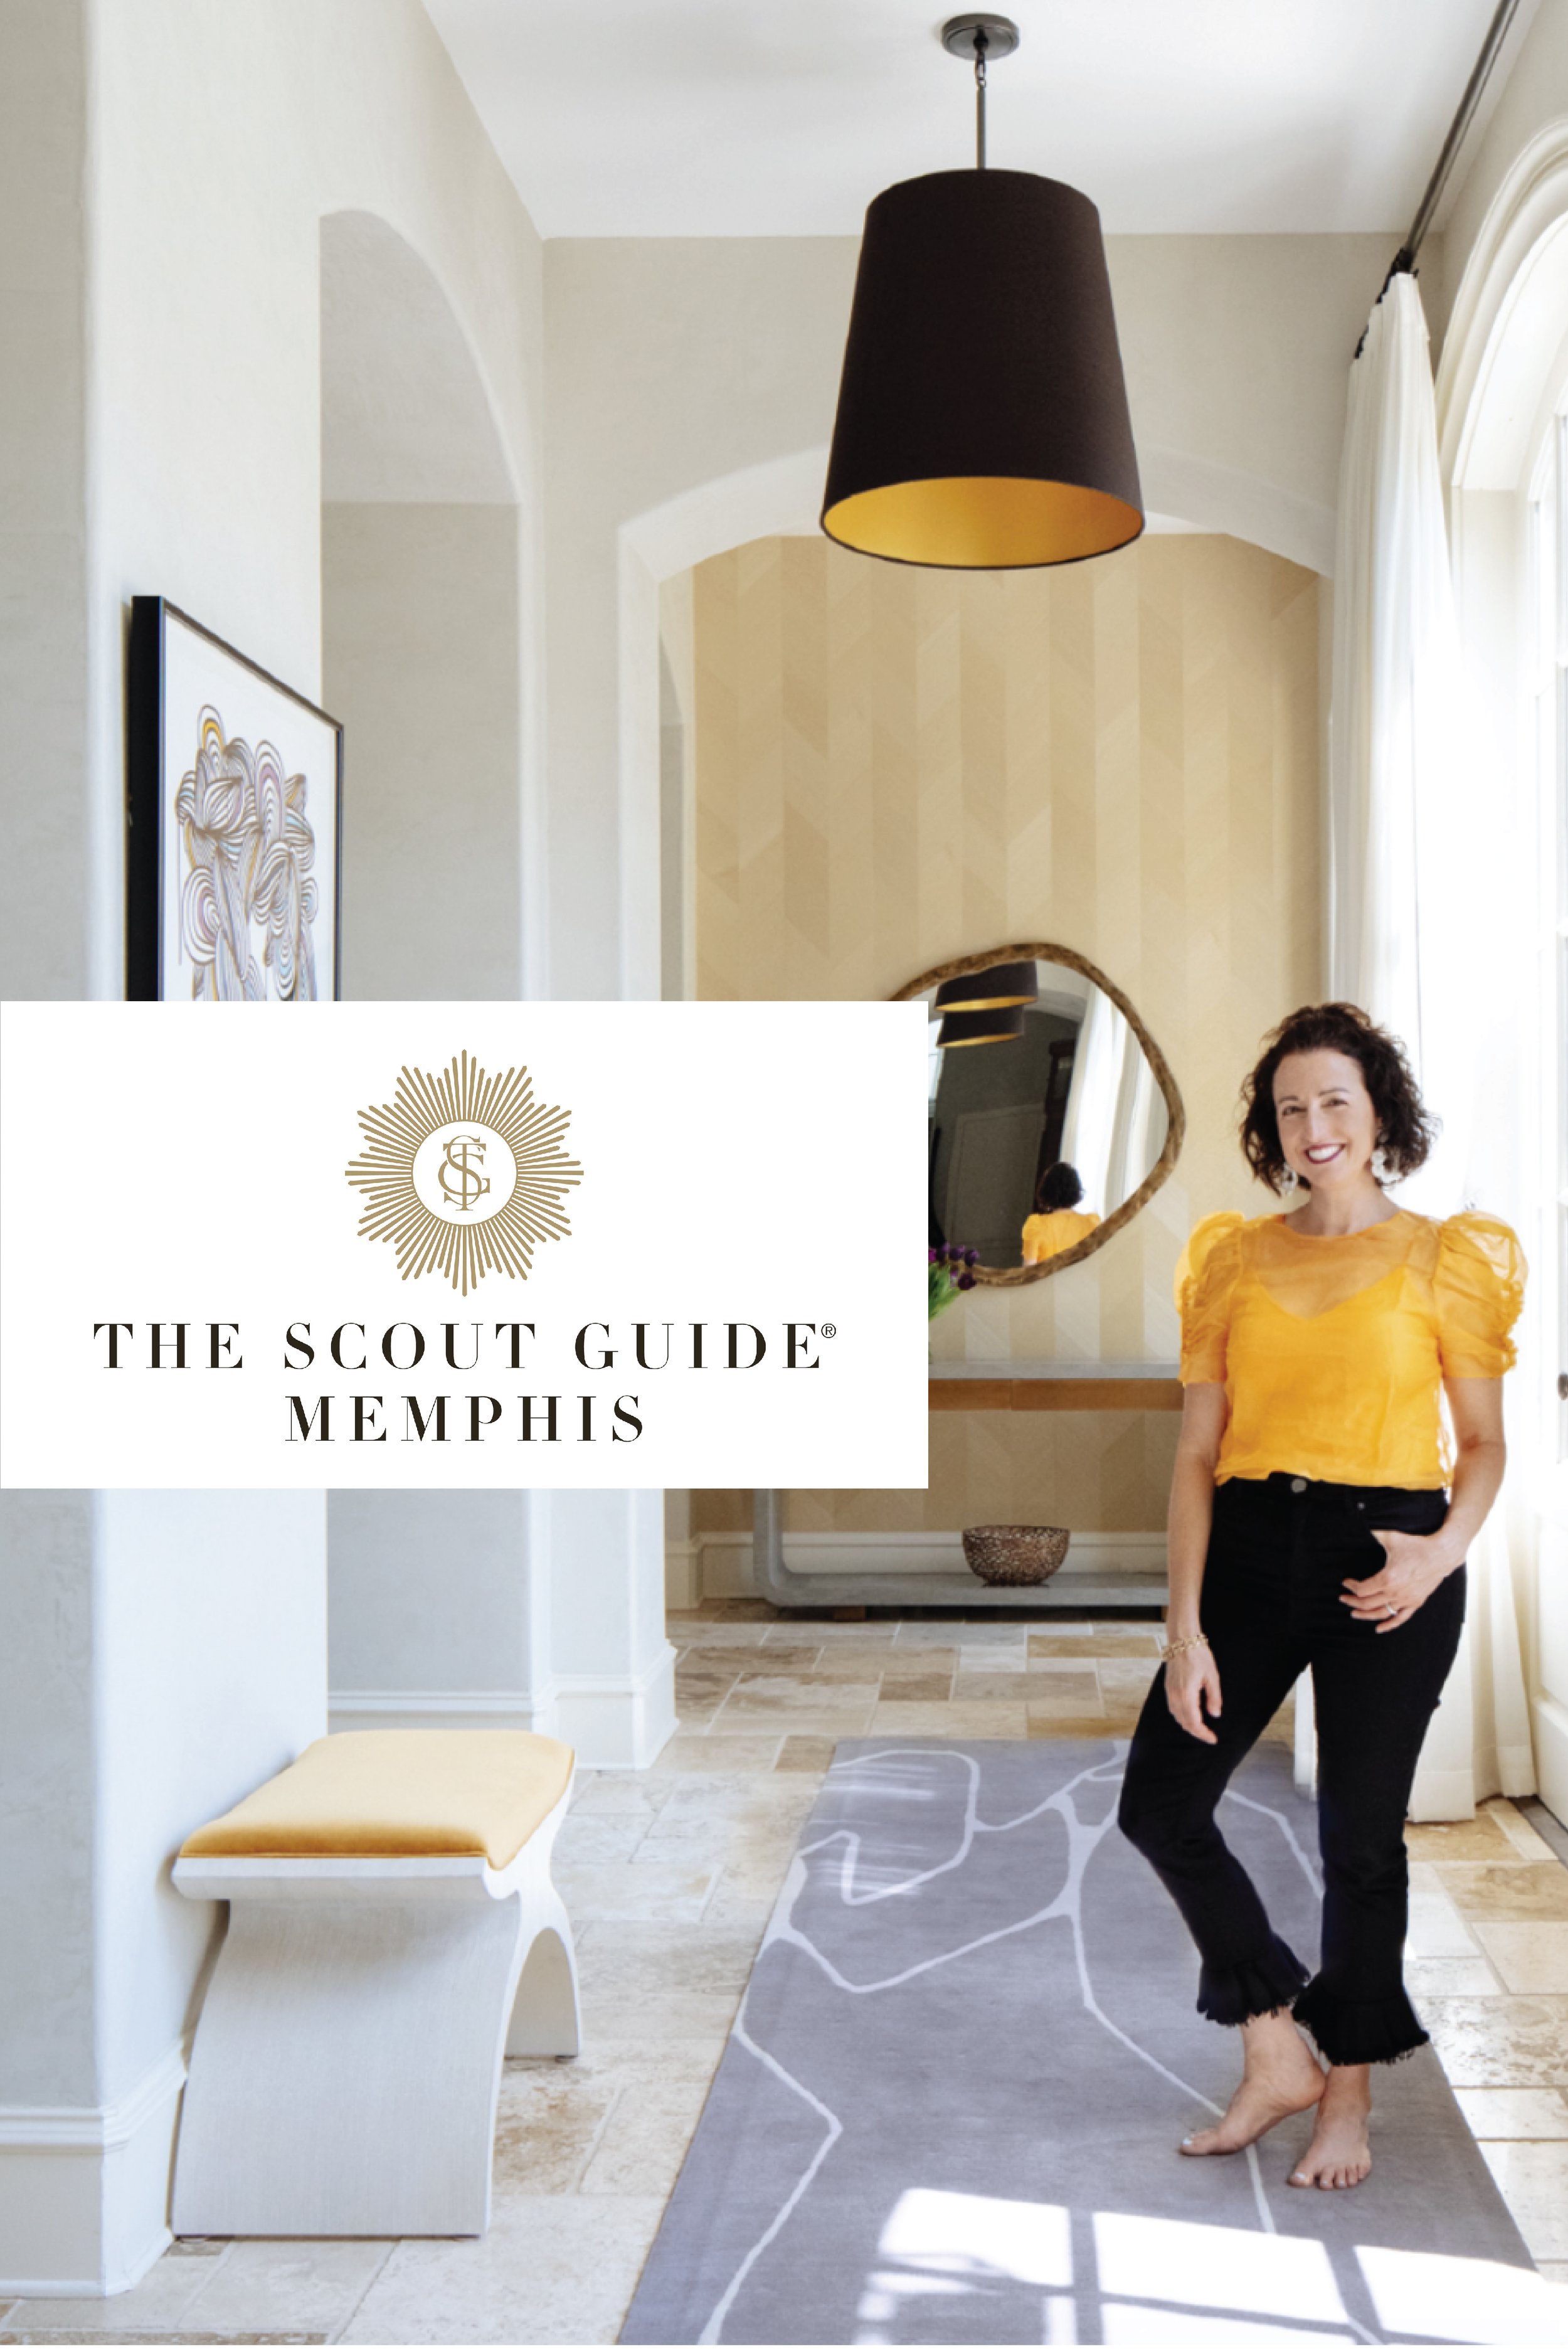 THE SCOUT GUIDE OCTOBER 2021